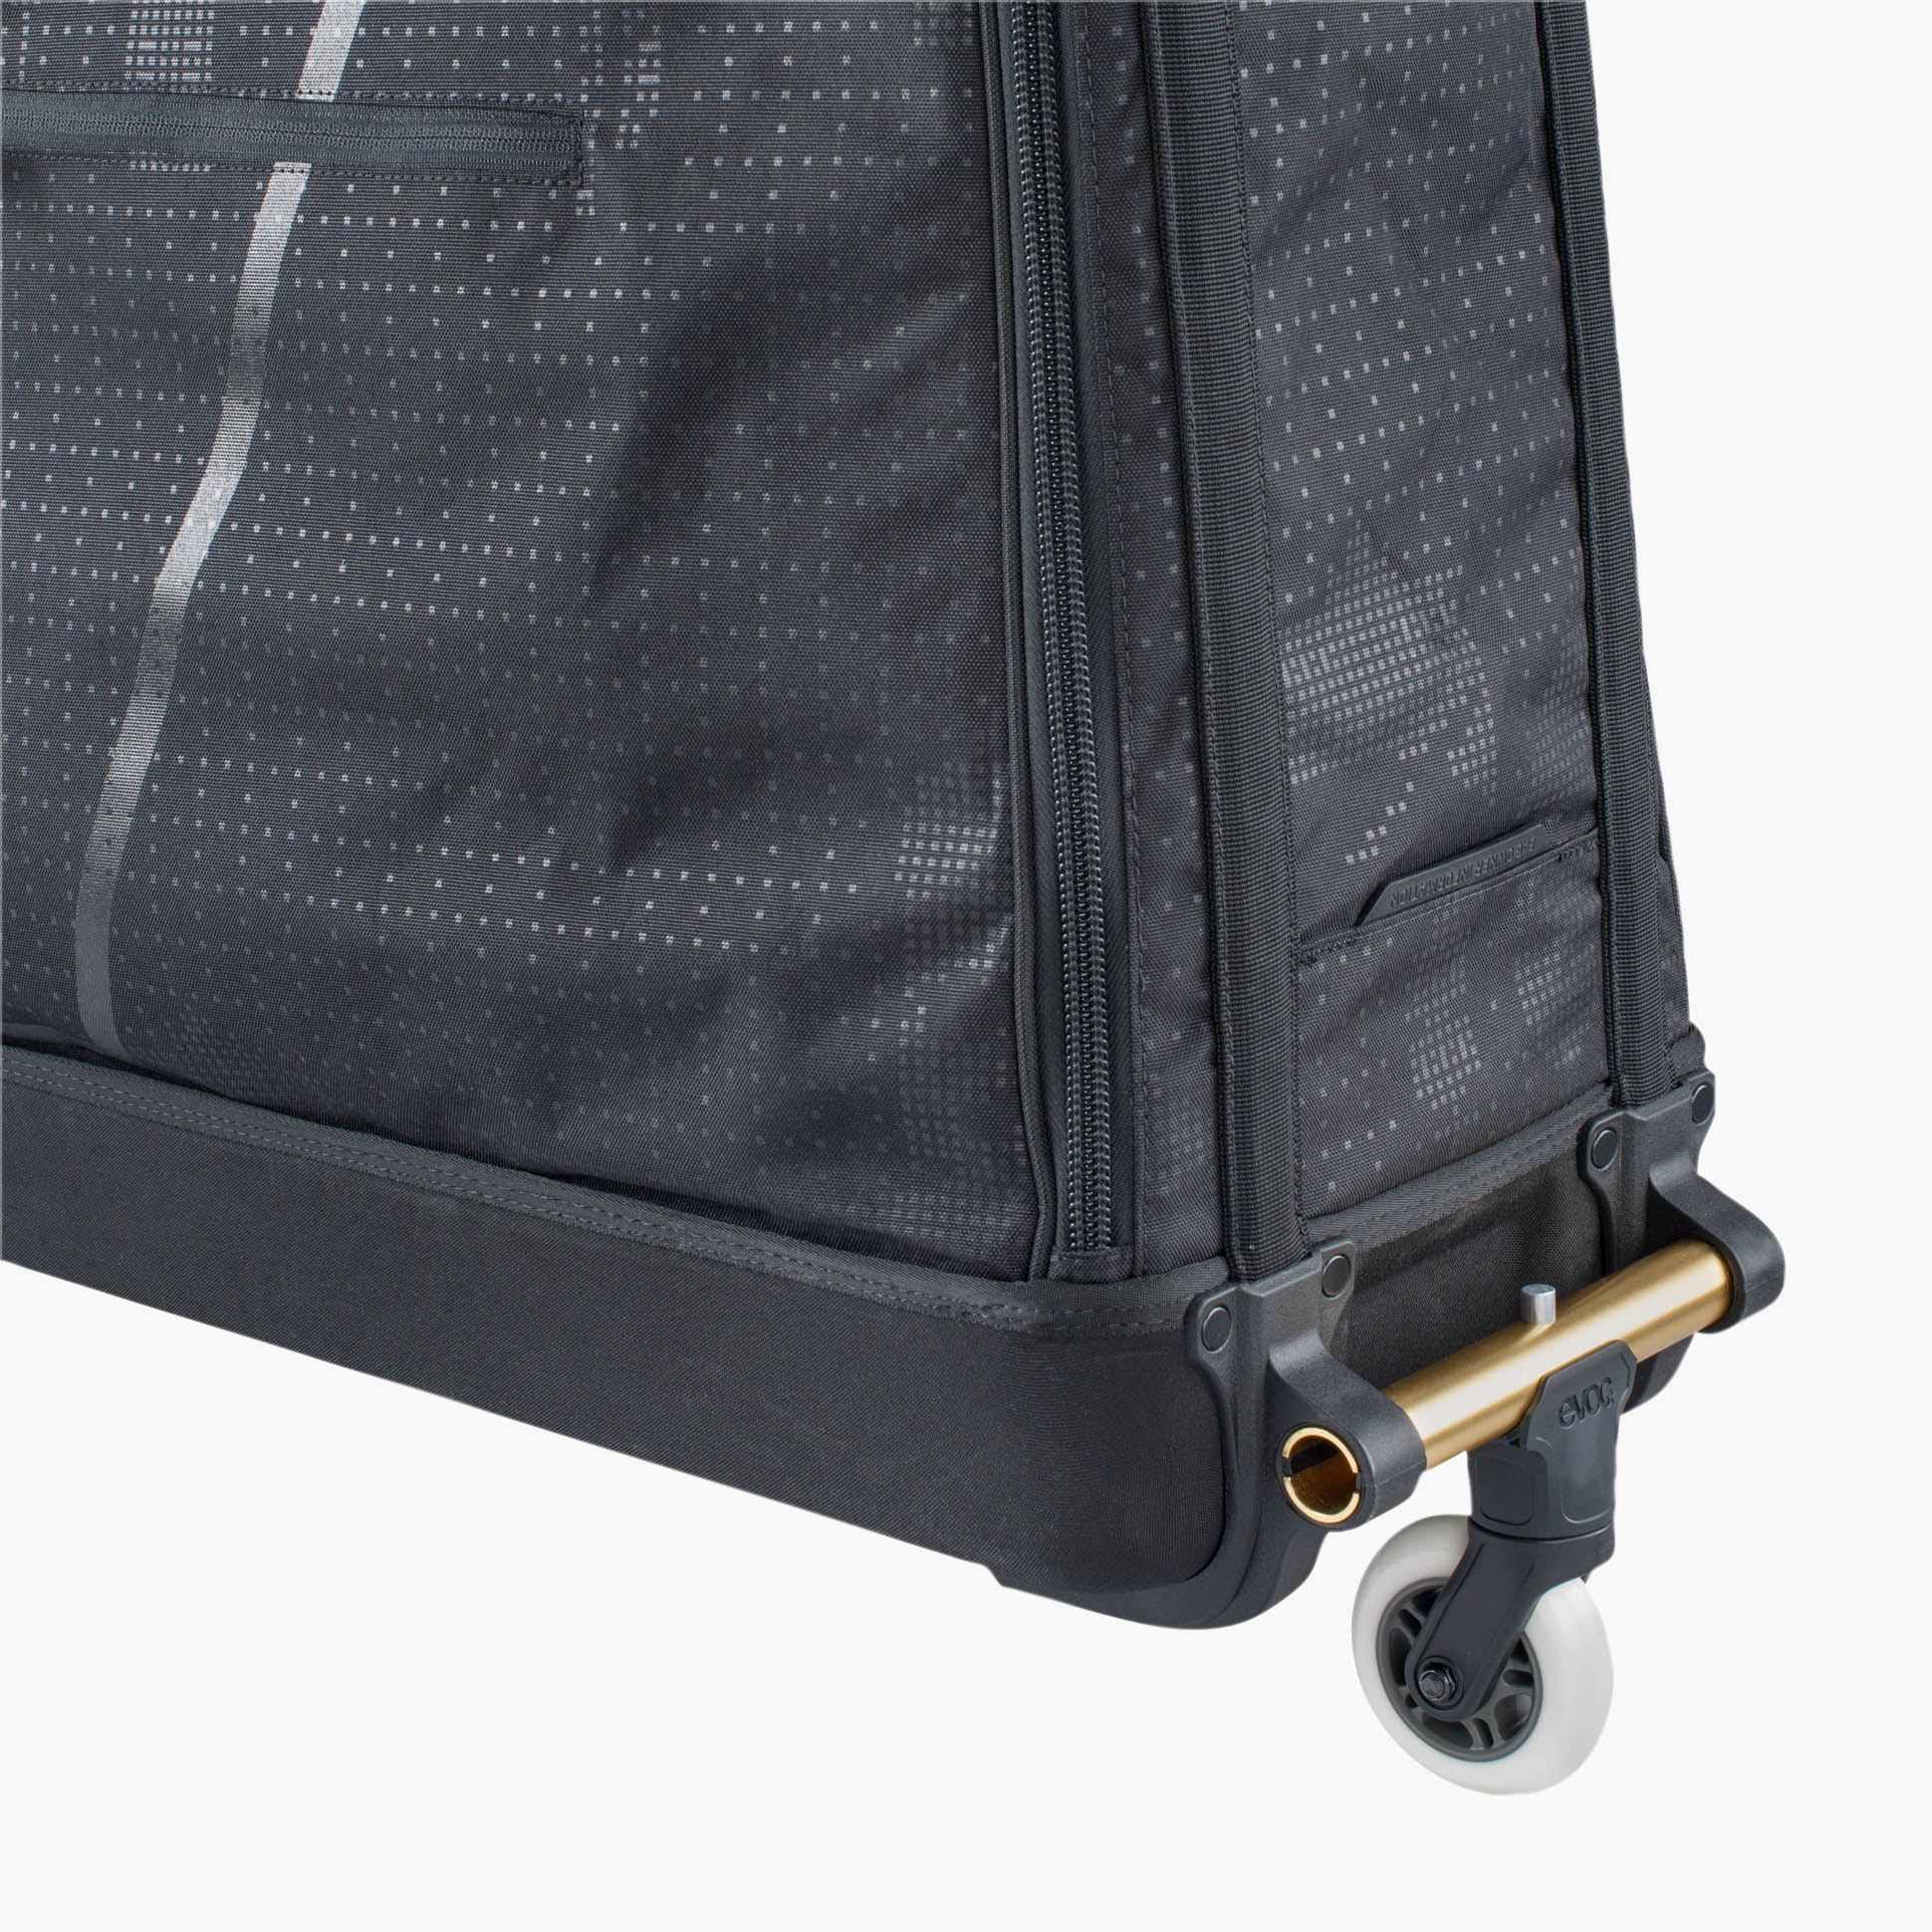 Evoc Launches New Road Bike Bag Pro And Bikepacking Luggage With Boa Dials Cyclist